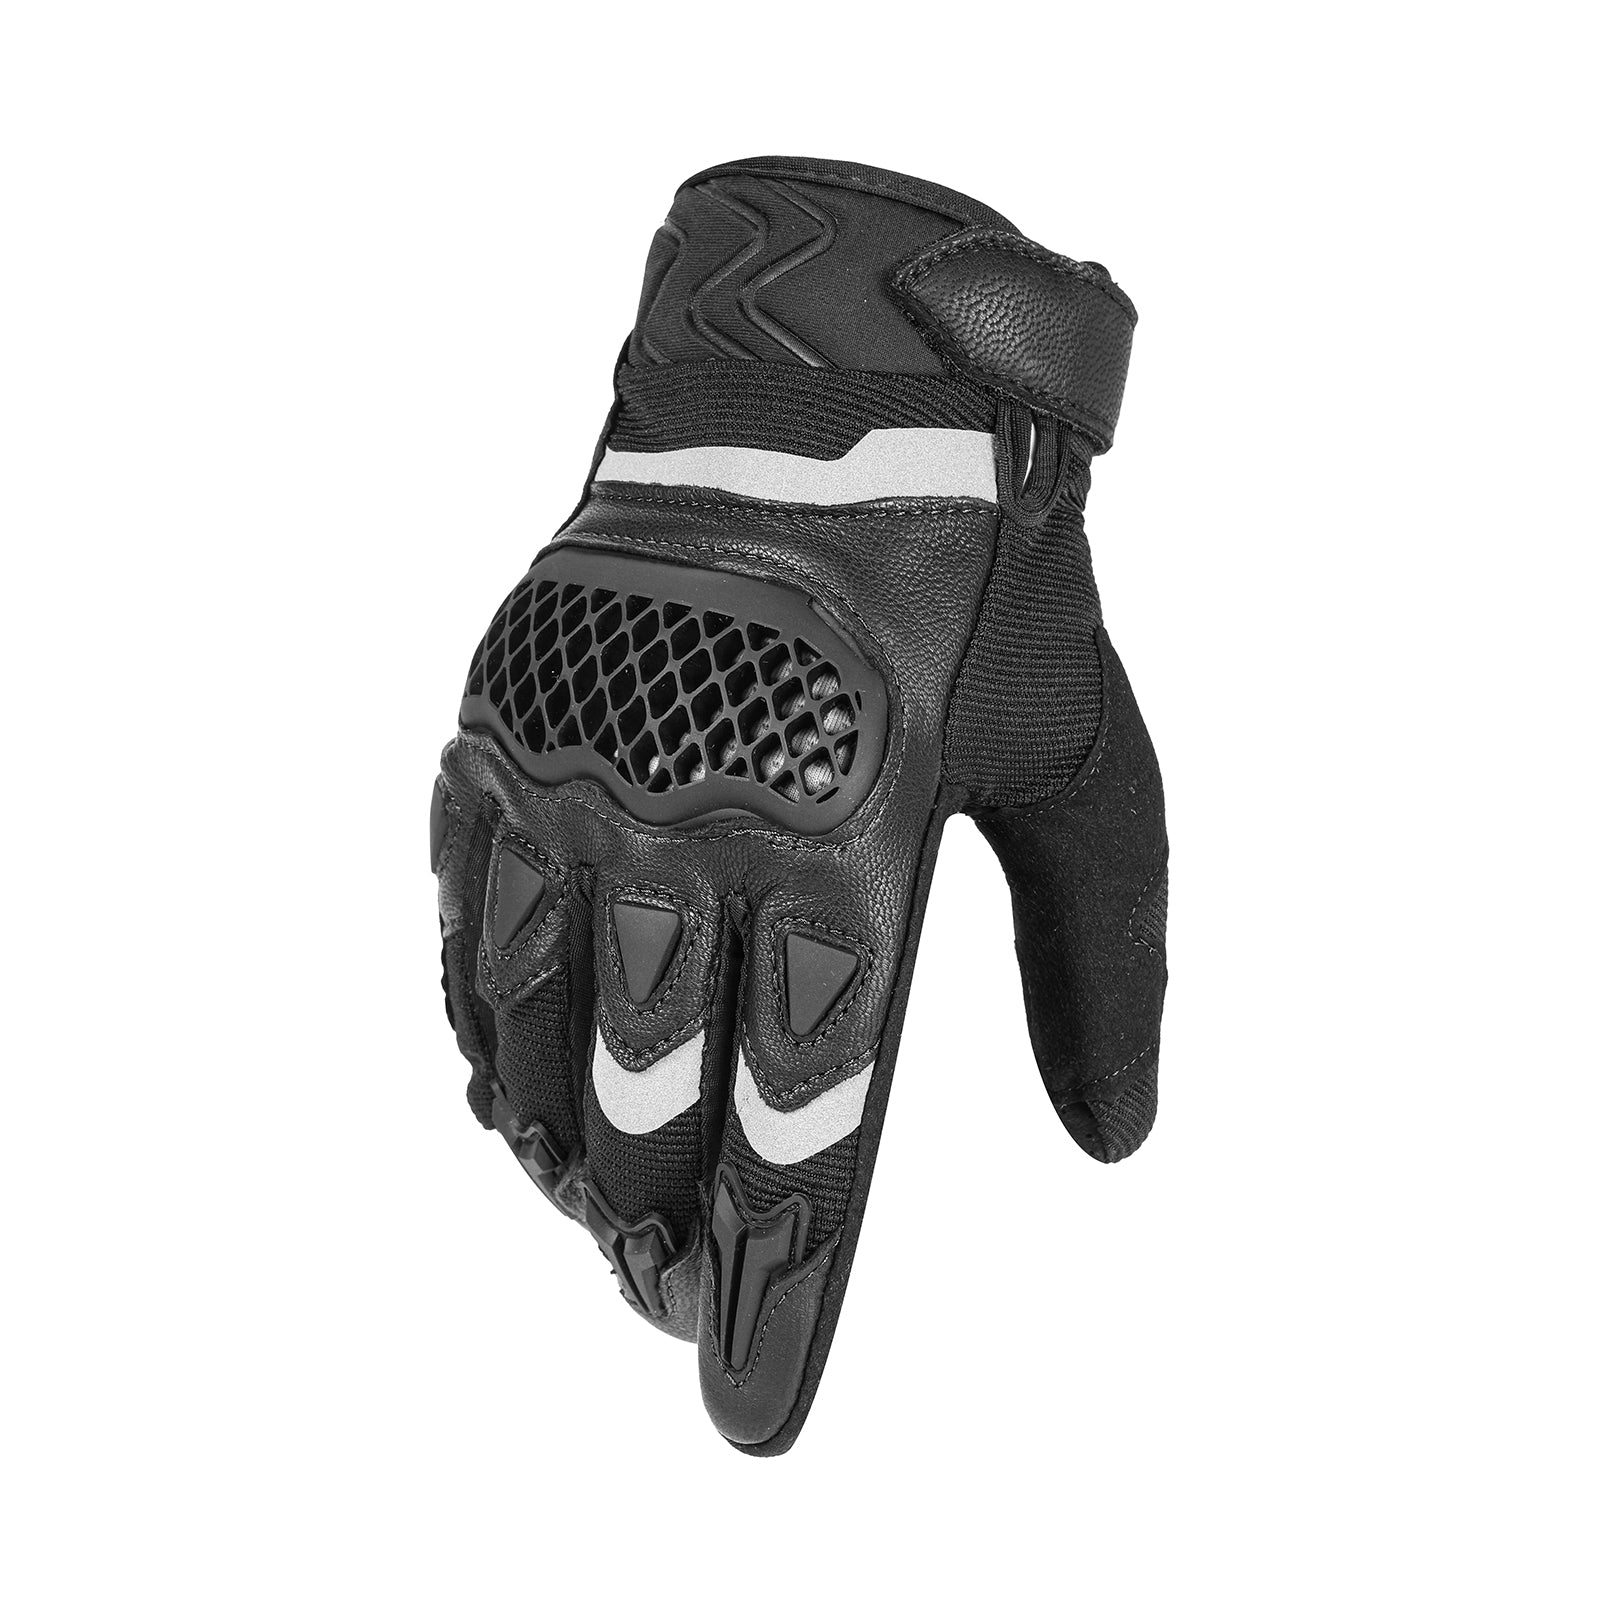 IRONJIAS Summer Mesh Breathable Motorcycle Protective Gloves